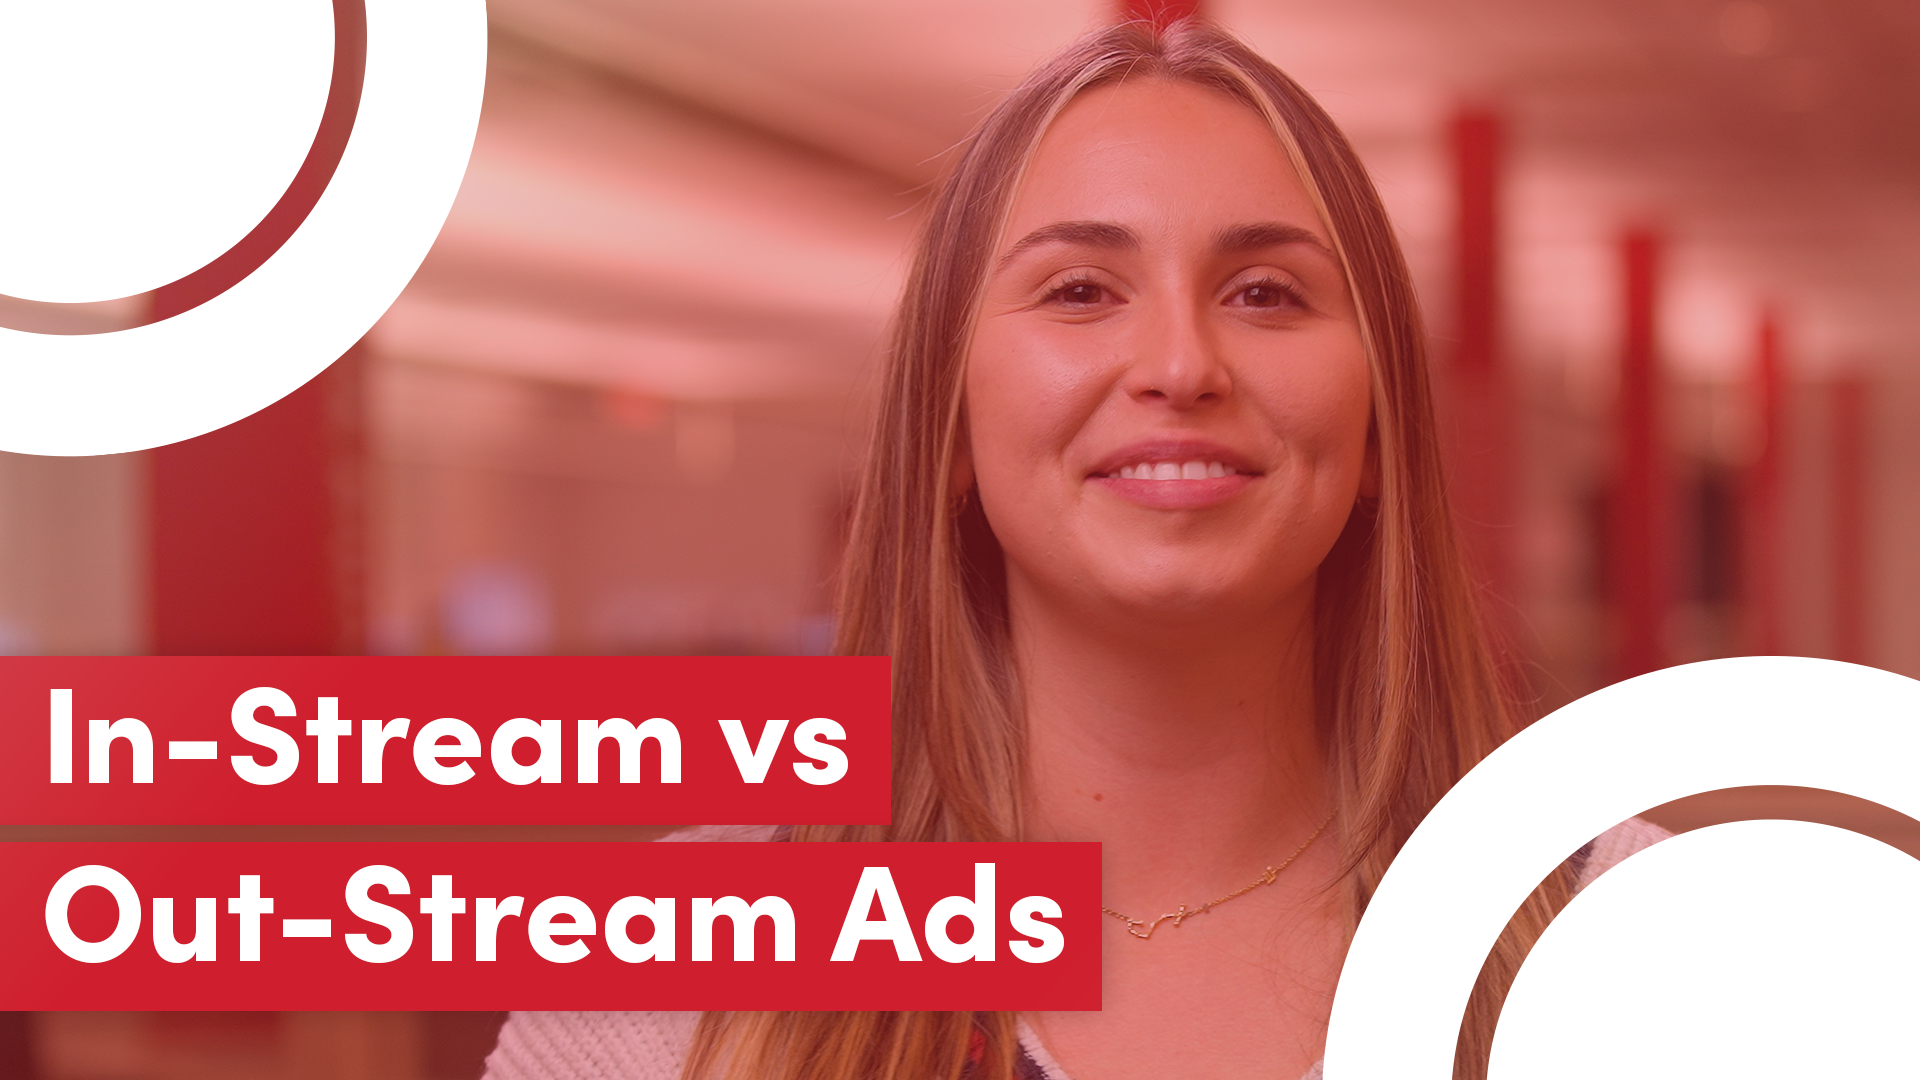 how to video explains difference between in-stream and out-stream ads